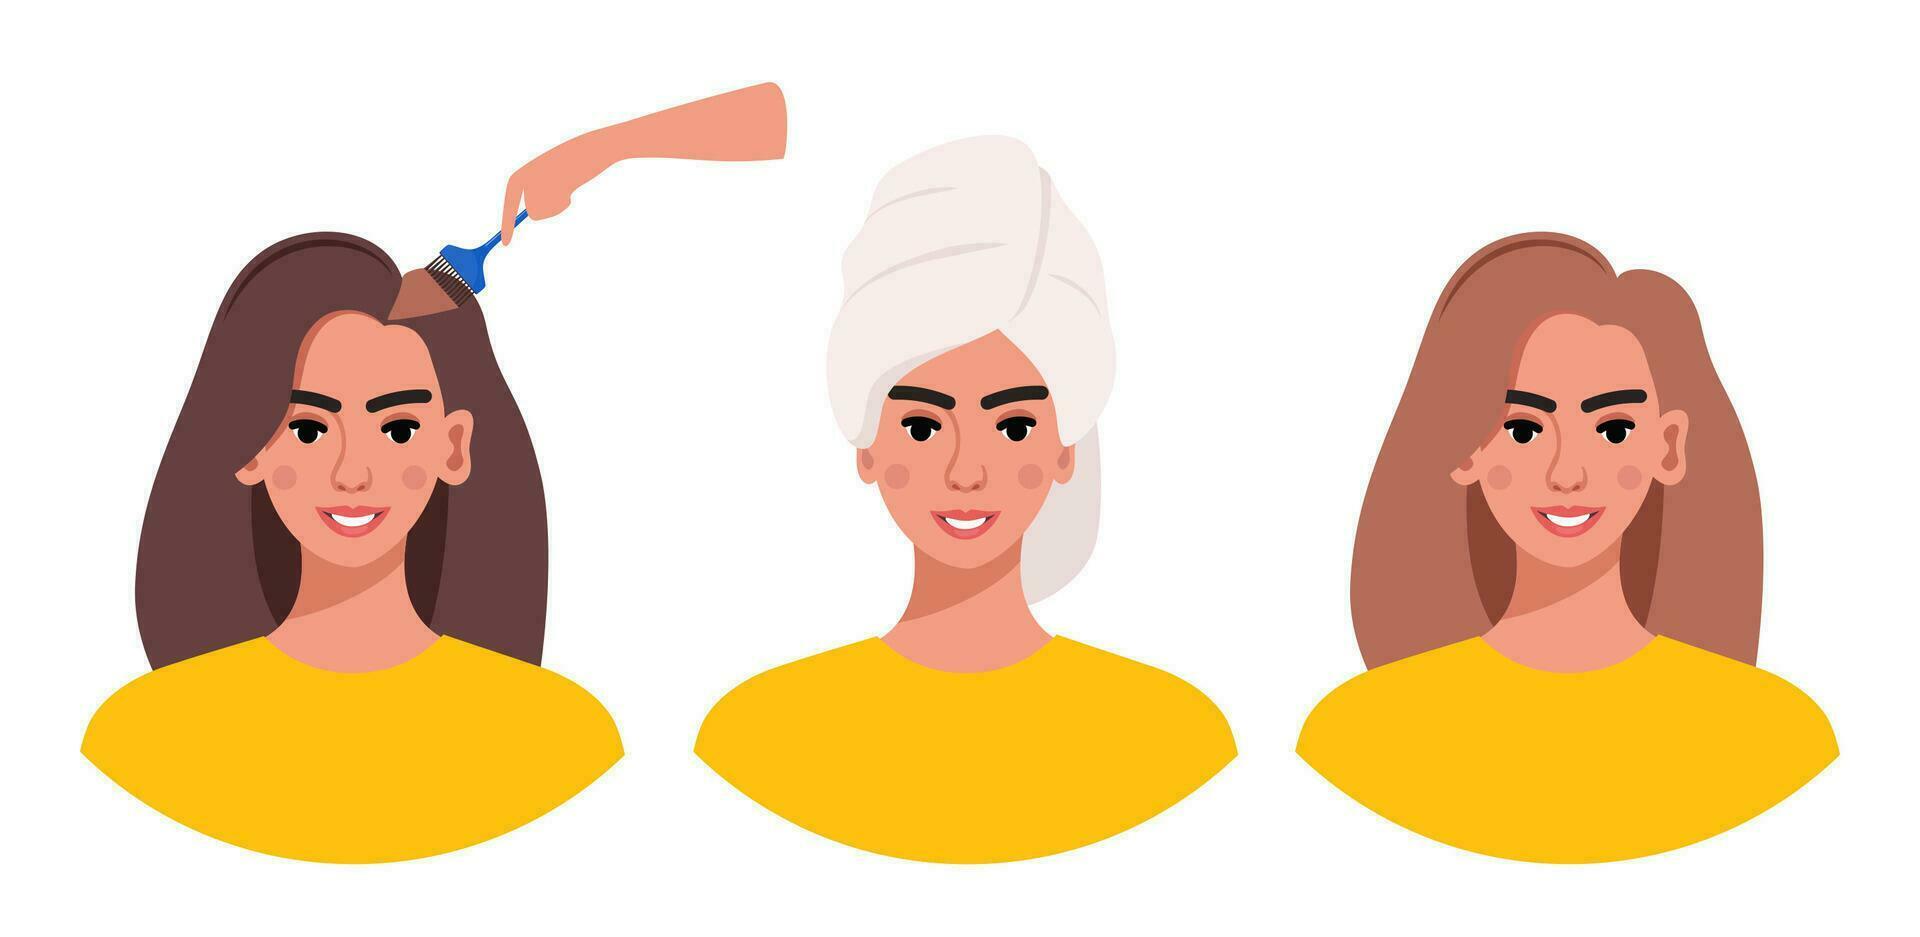 Steps of hair coloring process for woman at home. Brunette changes her hair color to lighter one. Hair lightening. How to dye your hair. Vector illustration.